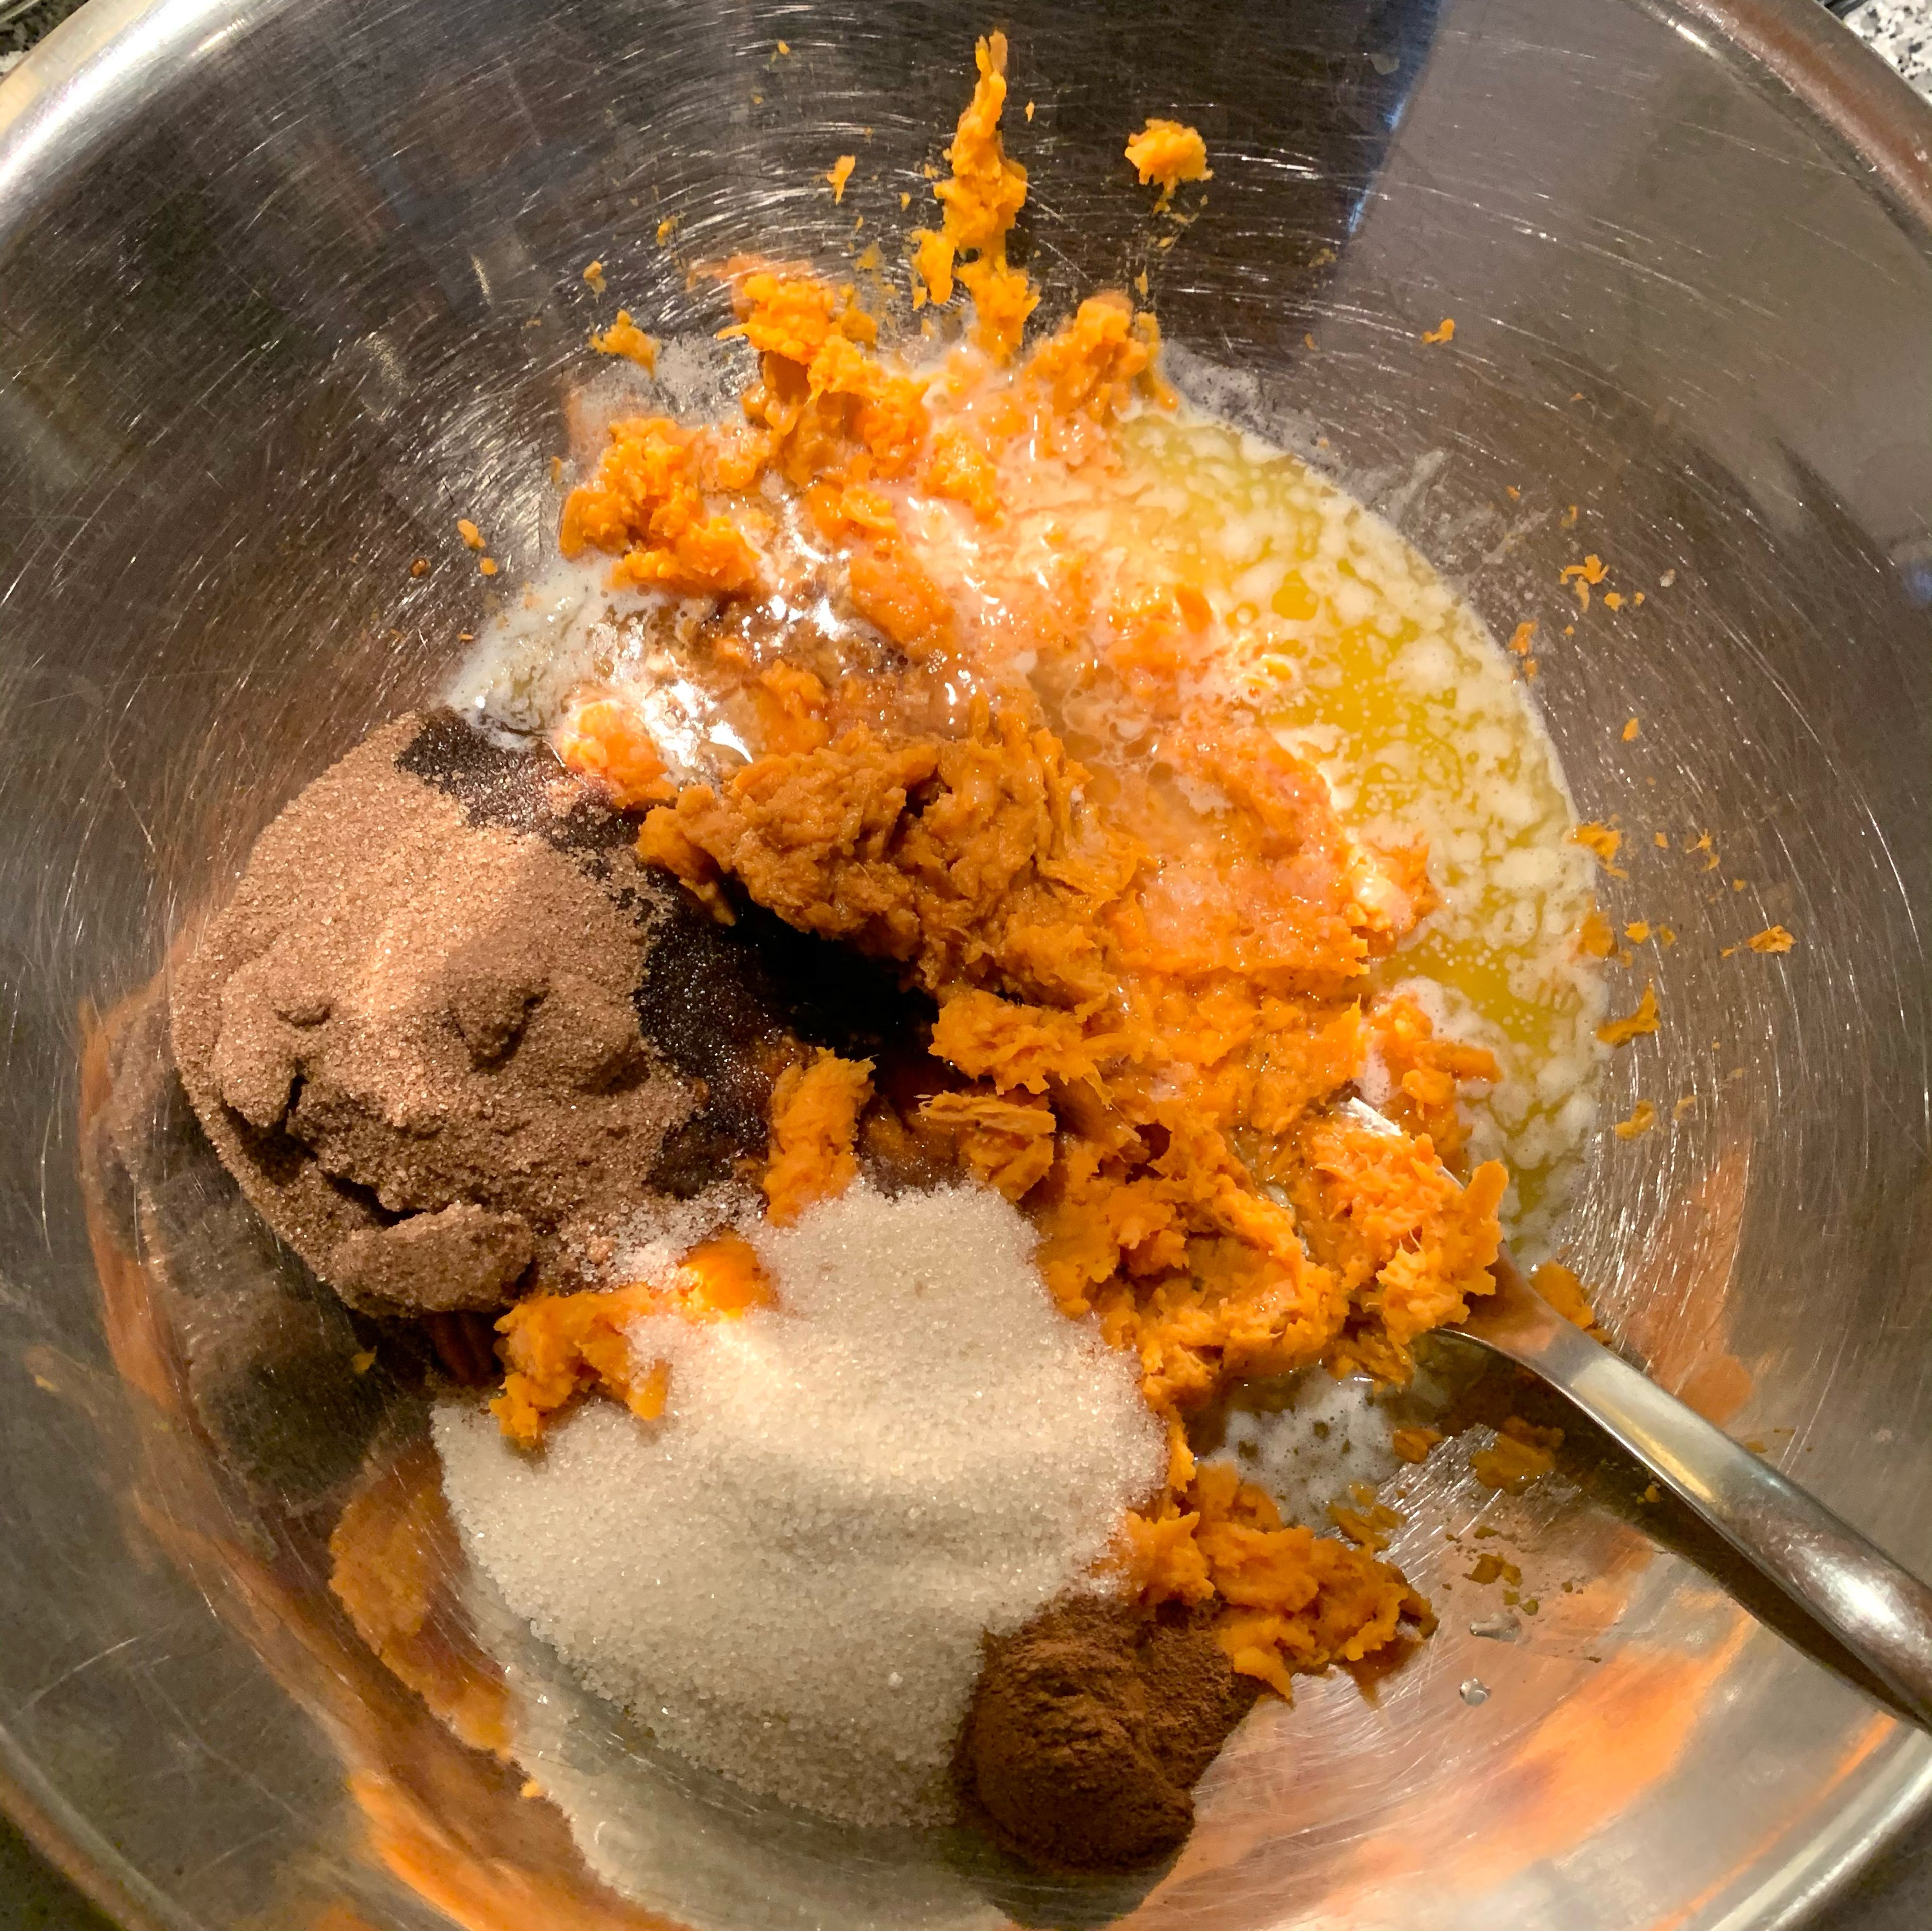 Add 1 bar of melted butter, white sugar, brown sugar, vanilla, ground cinnamon and lemon to the smashed sweet potatoes. Mix everything with a fork.